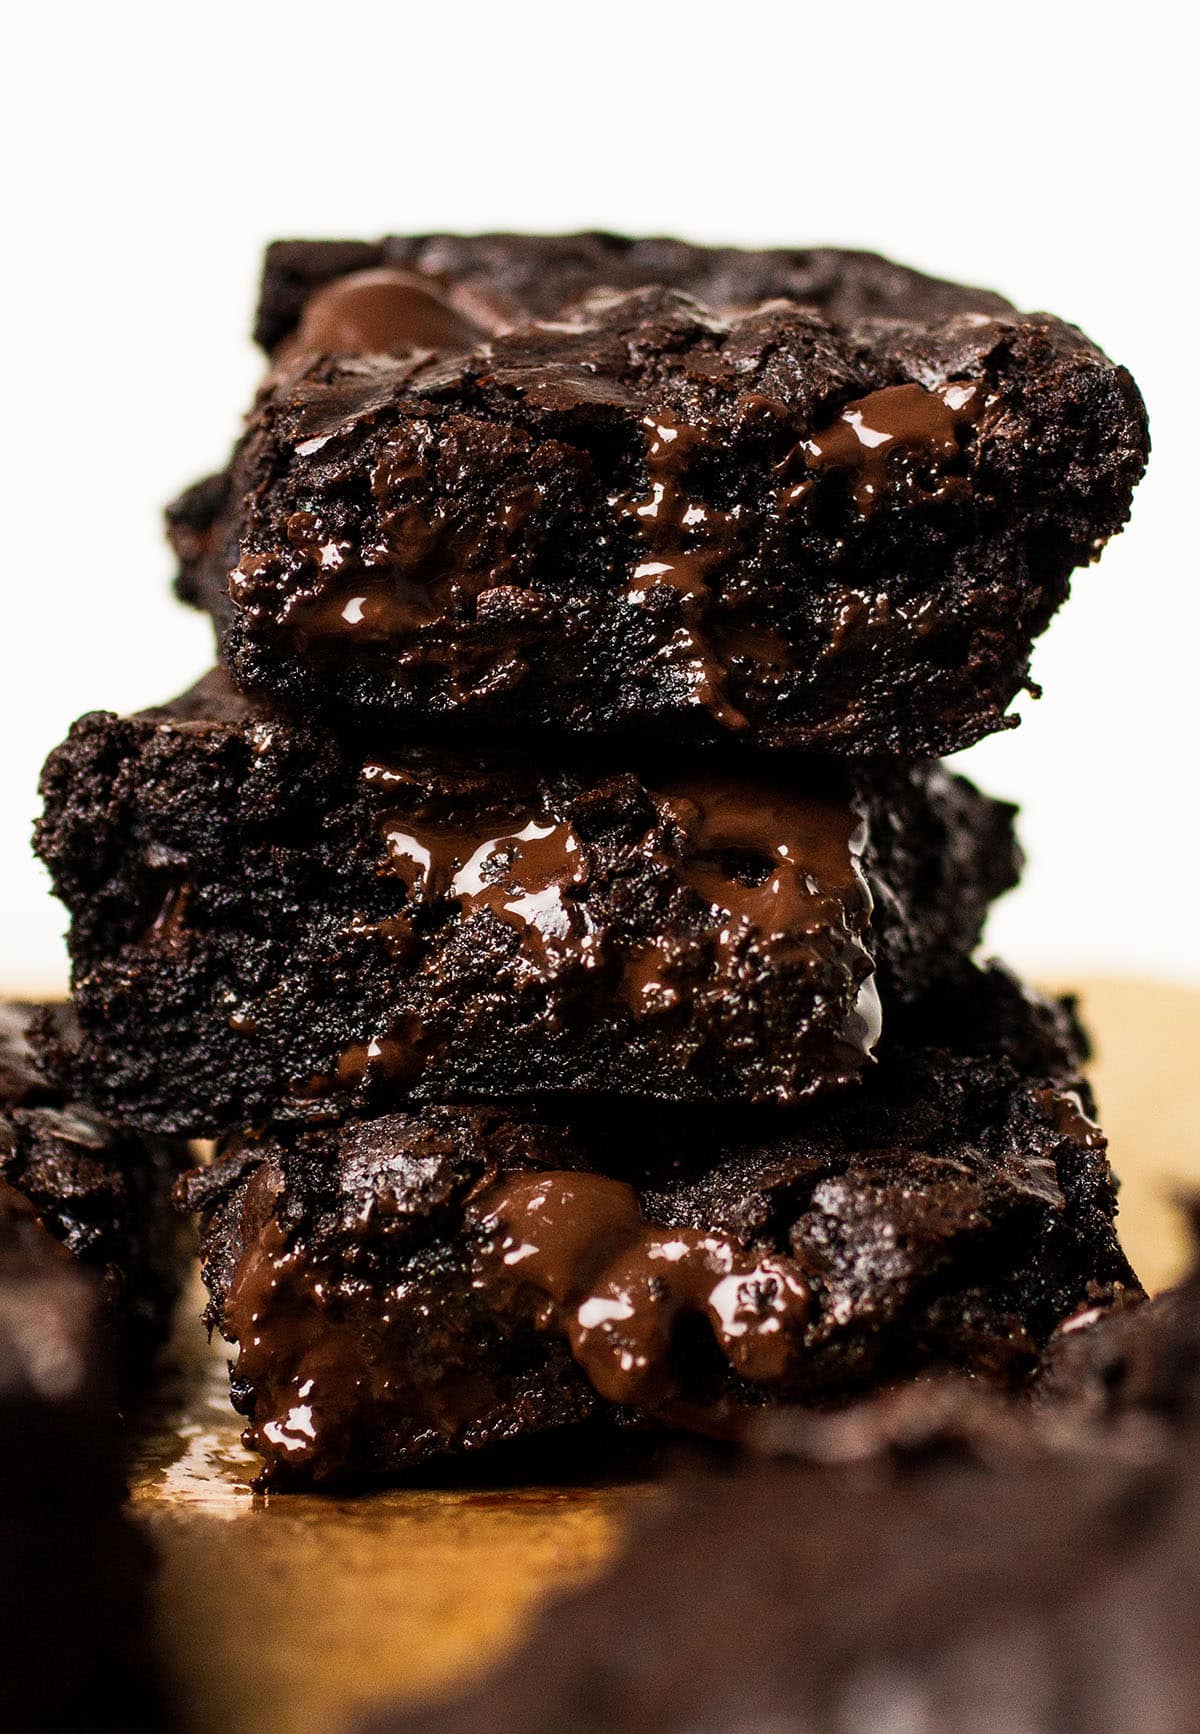 Three brownies stacked on top of each other.